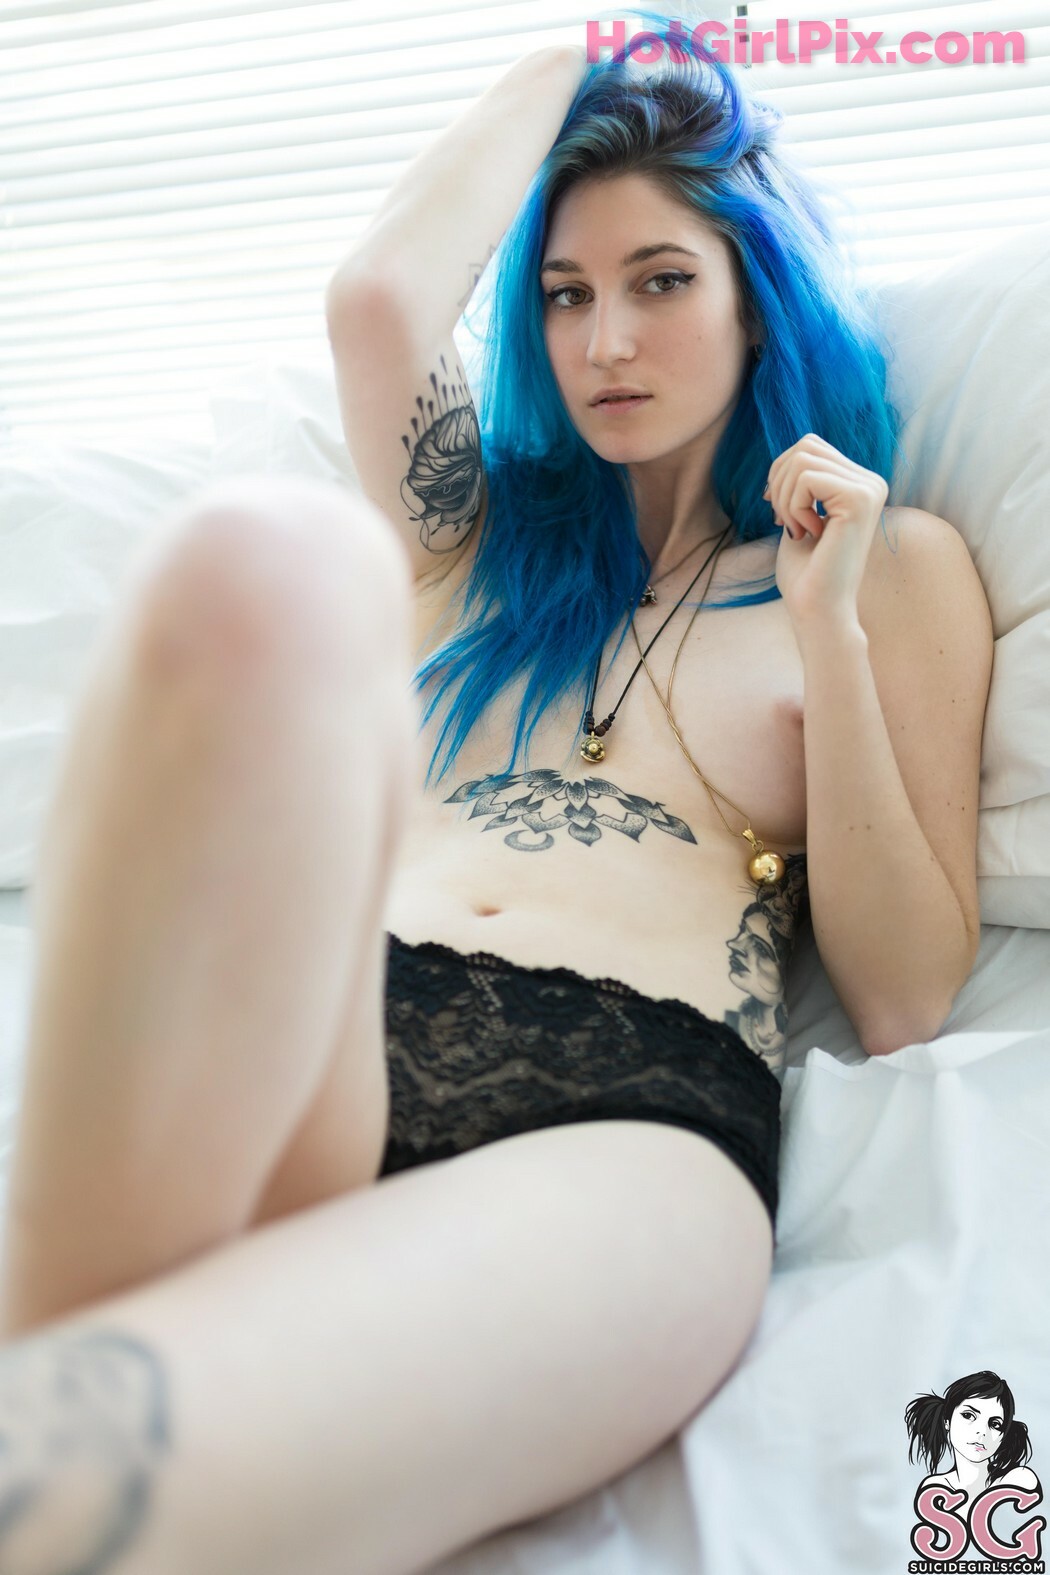 [Suicide Girls] Anouk - A Storm Inside Cover Photo